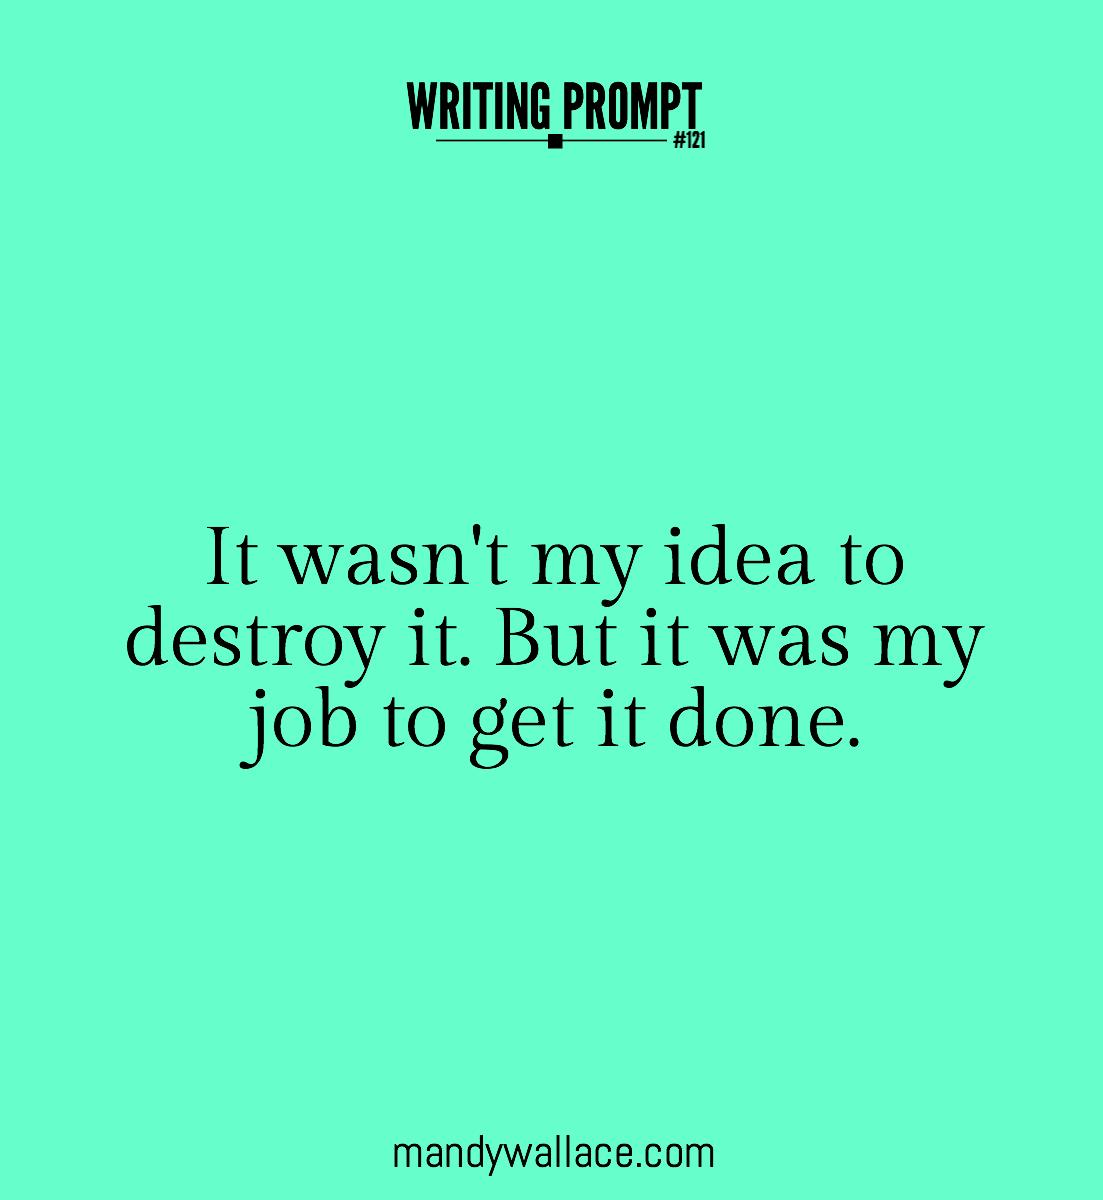 definition of writing prompt